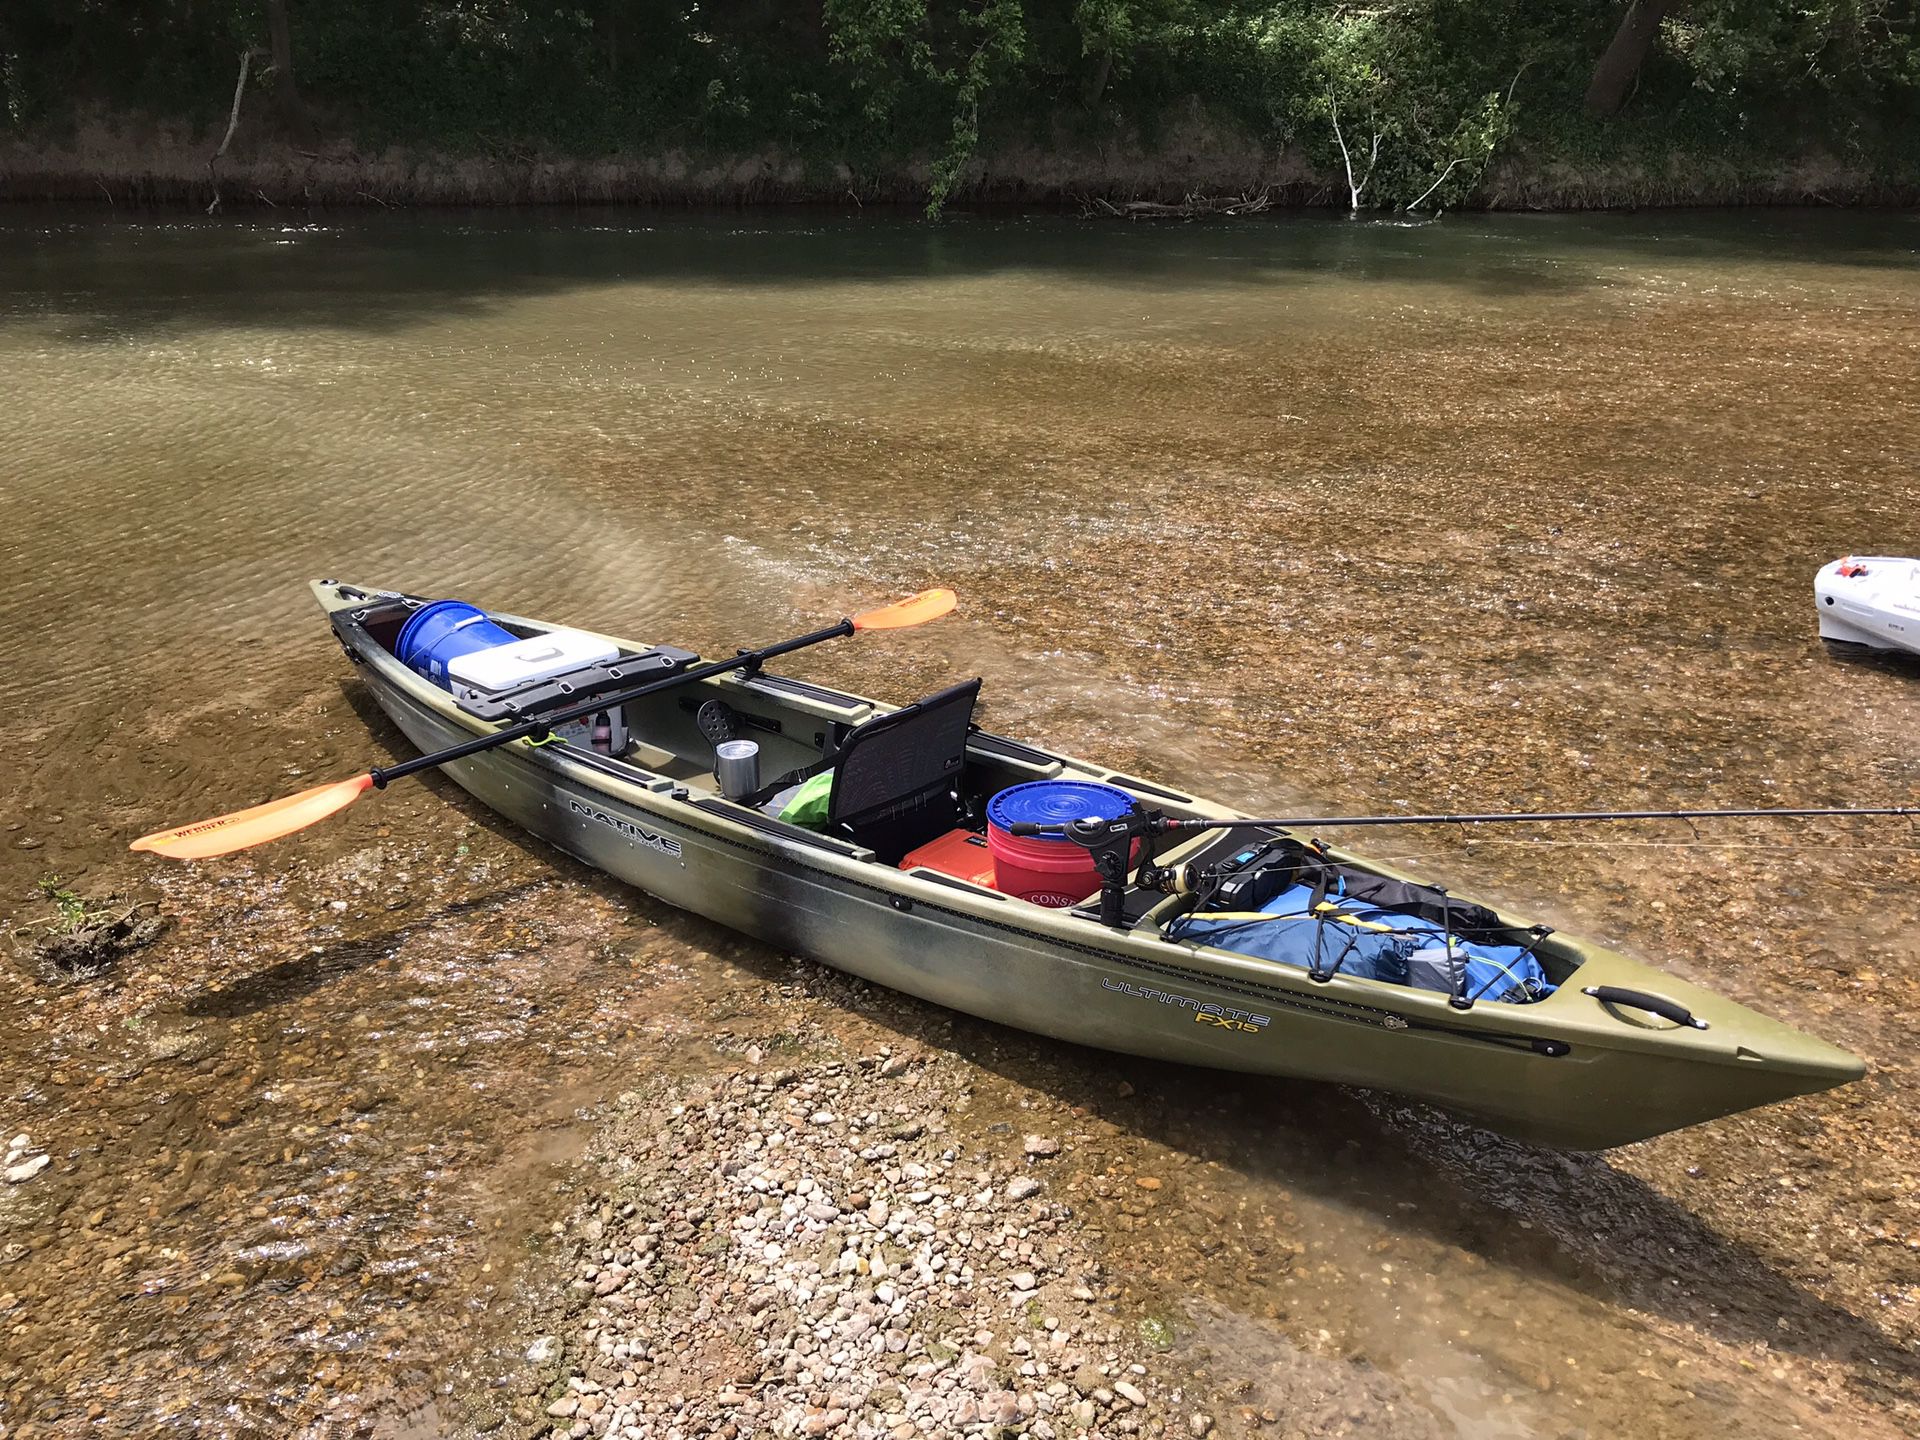 Native Watercraft Ultimate FX 15 Kayak for Sale in Round Rock, TX - OfferUp